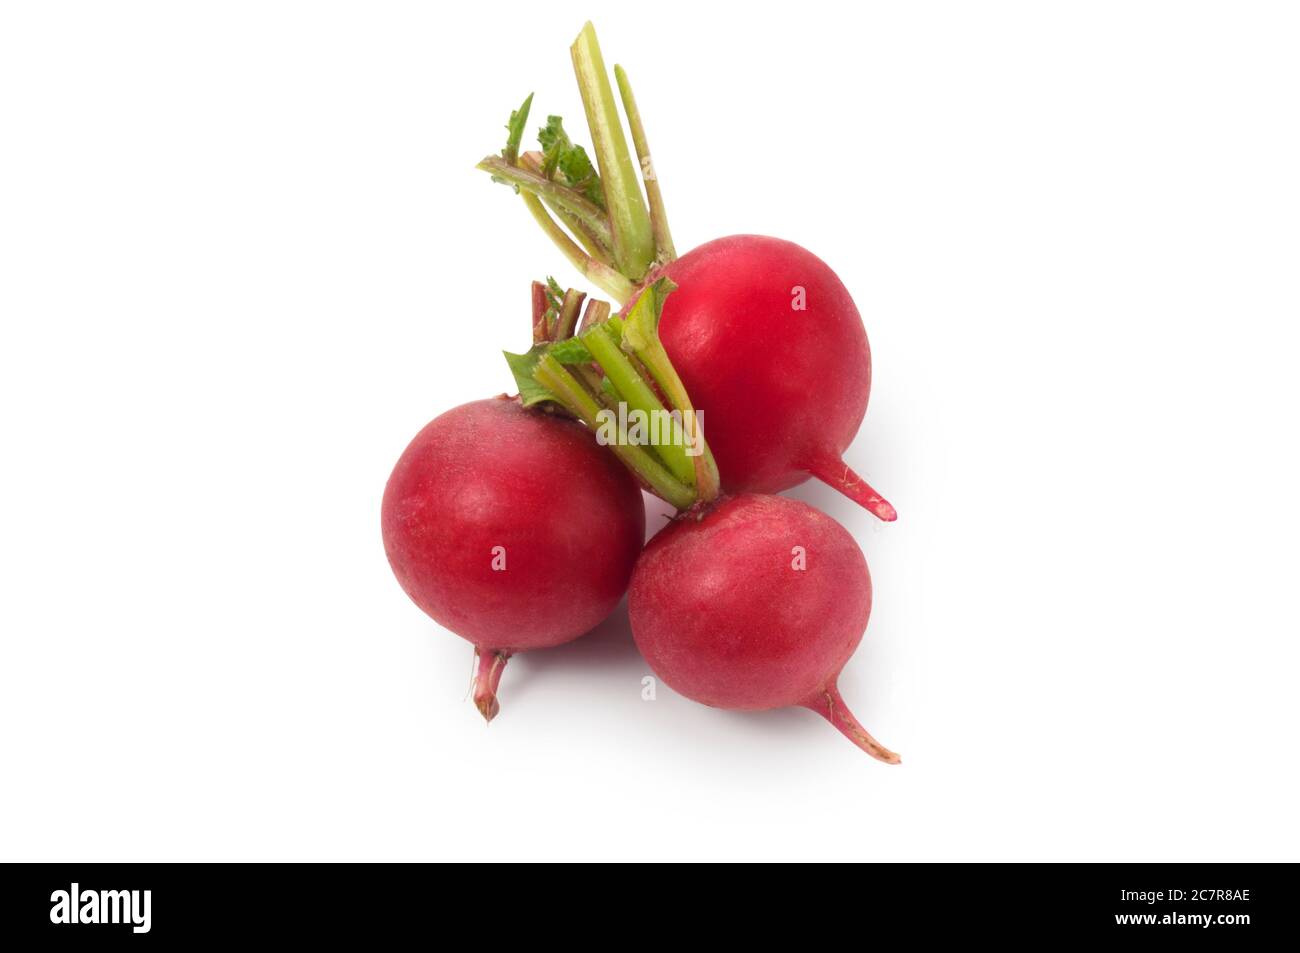 Studio shot of freshly picked radish cut out against a white background - John Gollop Stock Photo